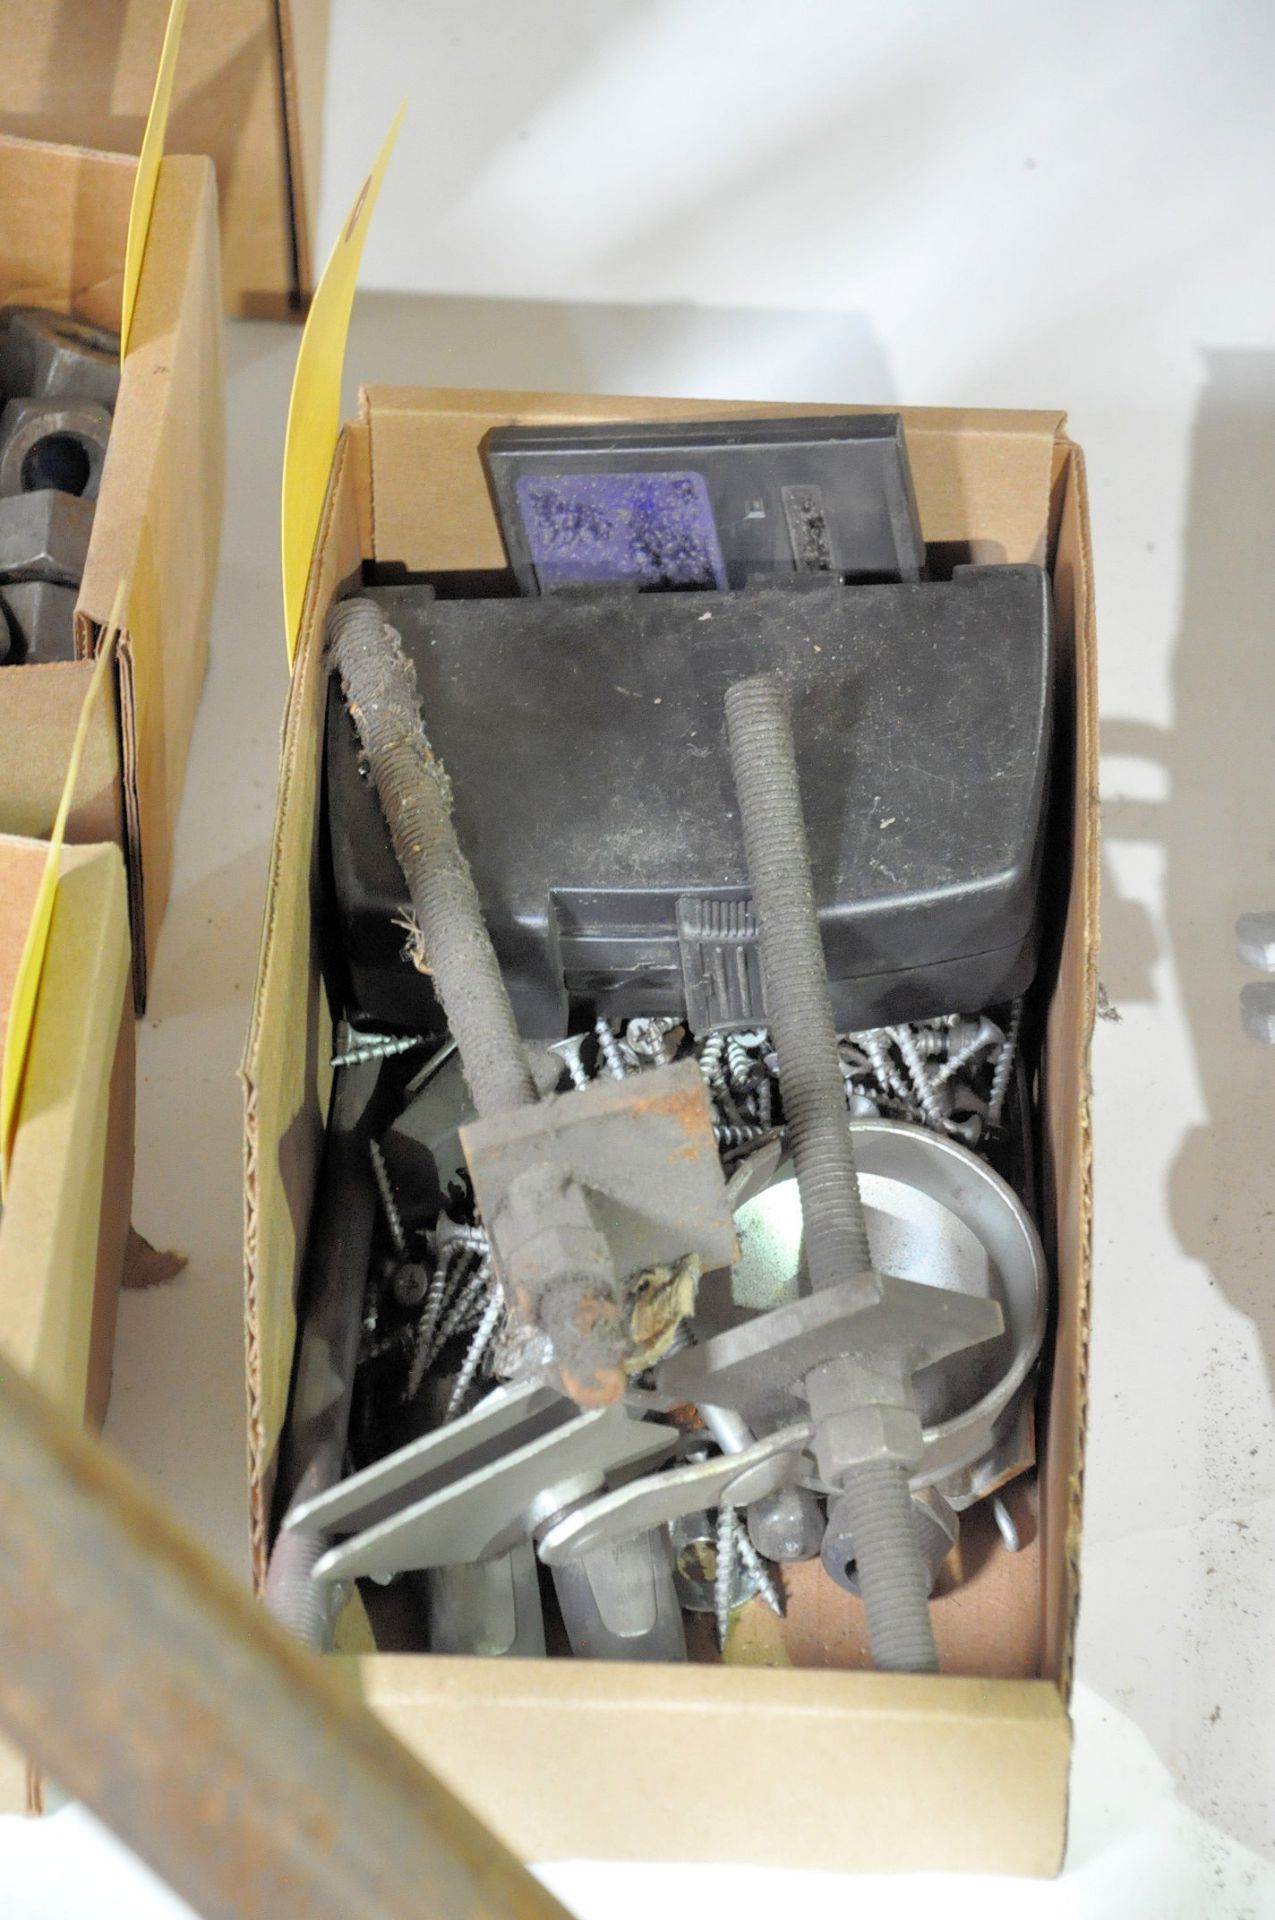 Lot-Bolts, Nuts, Washers, Tap Com Screws, Anchors, etc. in (15) Boxes on Floor Under (1) Table - Image 5 of 5